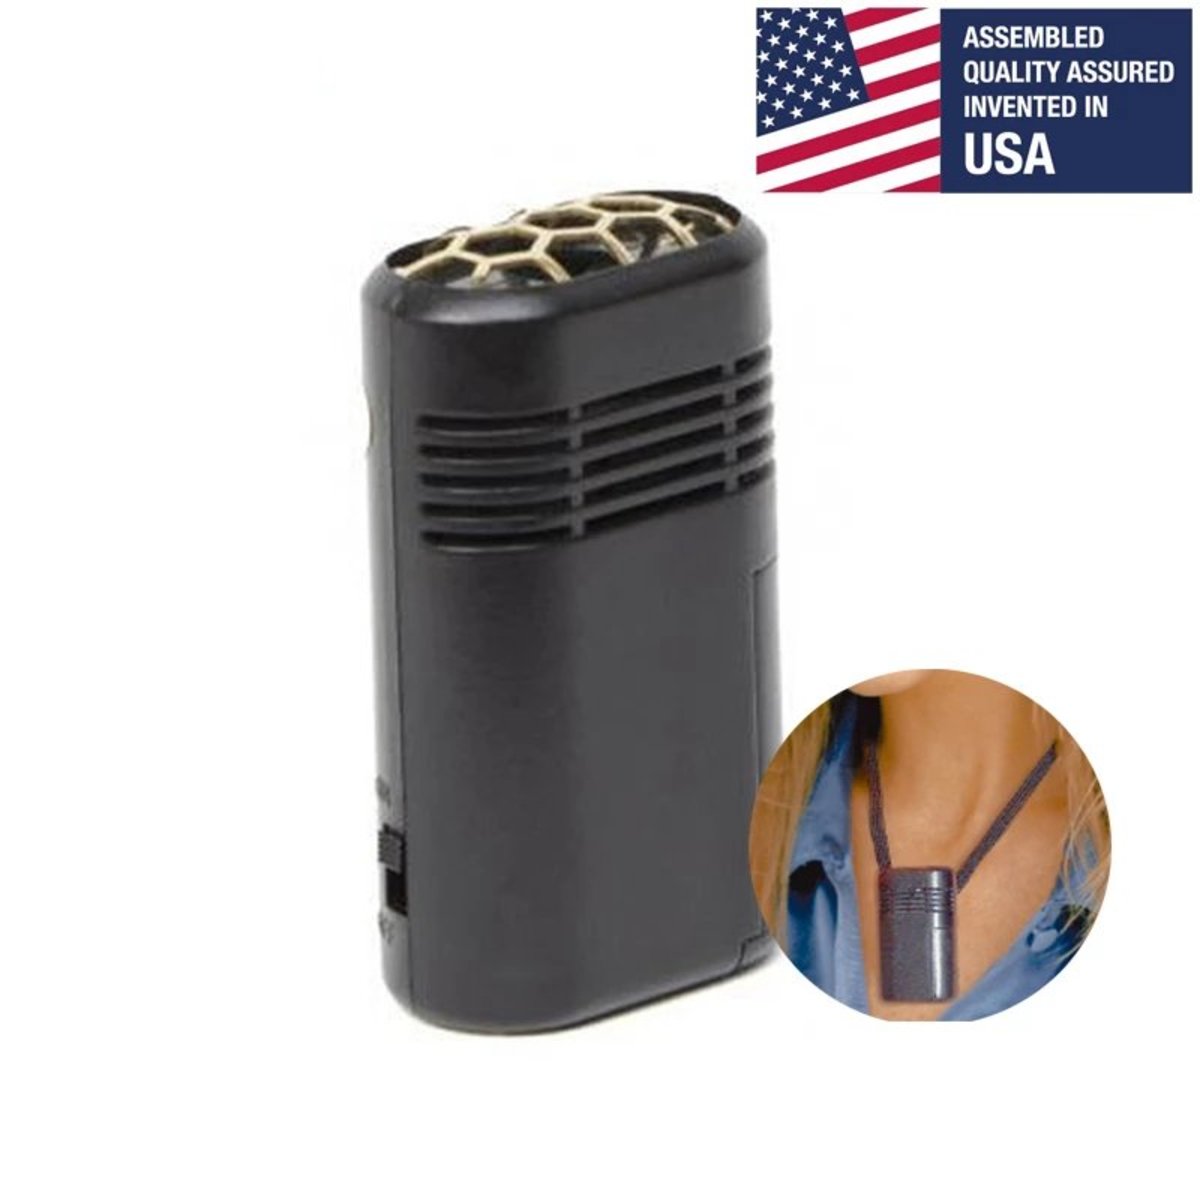 Wein Minimate - [originally imported from the United States] Air Supply® Personal Negative Ion Air Purifier AS150MM